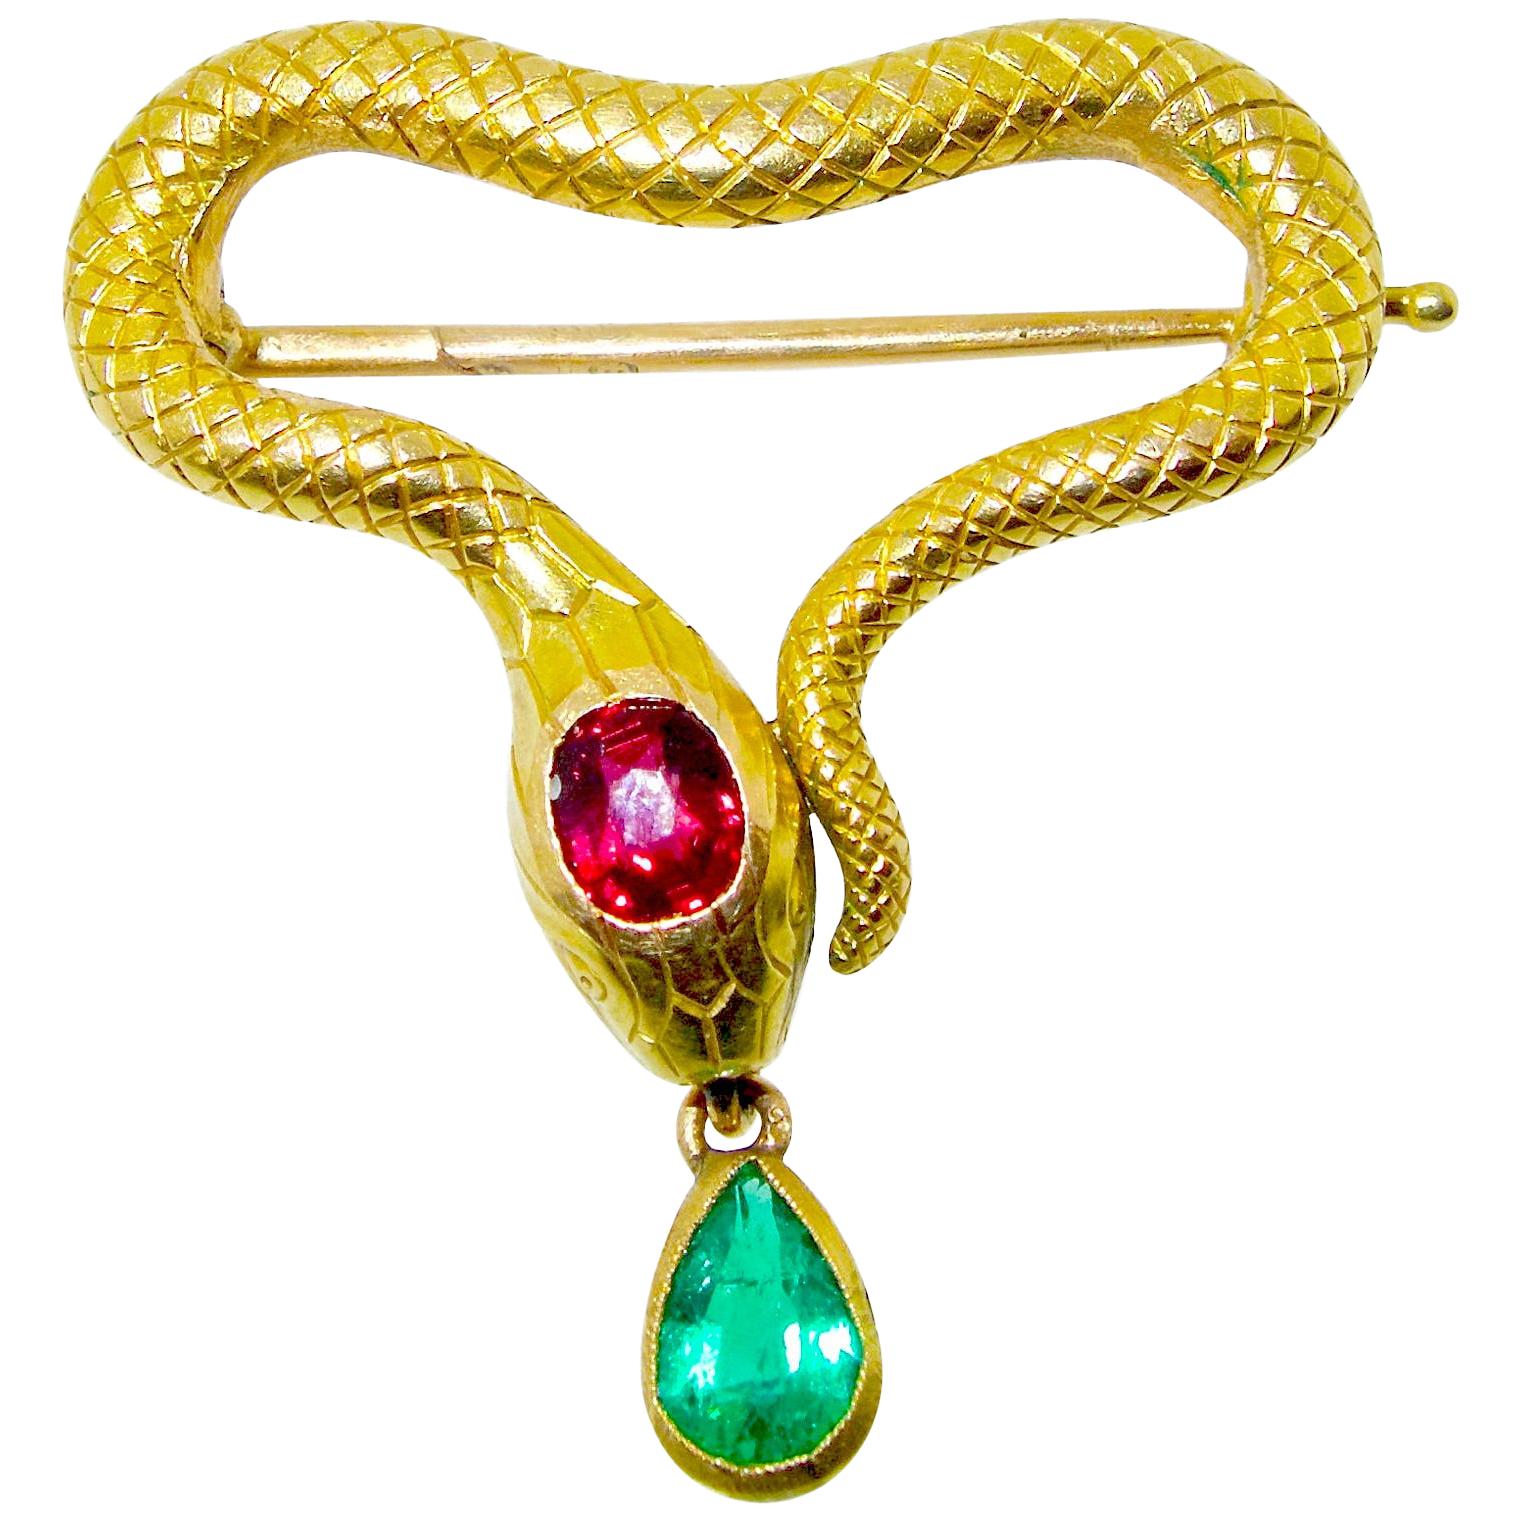 Russian Antique Ruby & Emerald Serpent Brooch Signed K. Faberge, Moscow, c. 1900